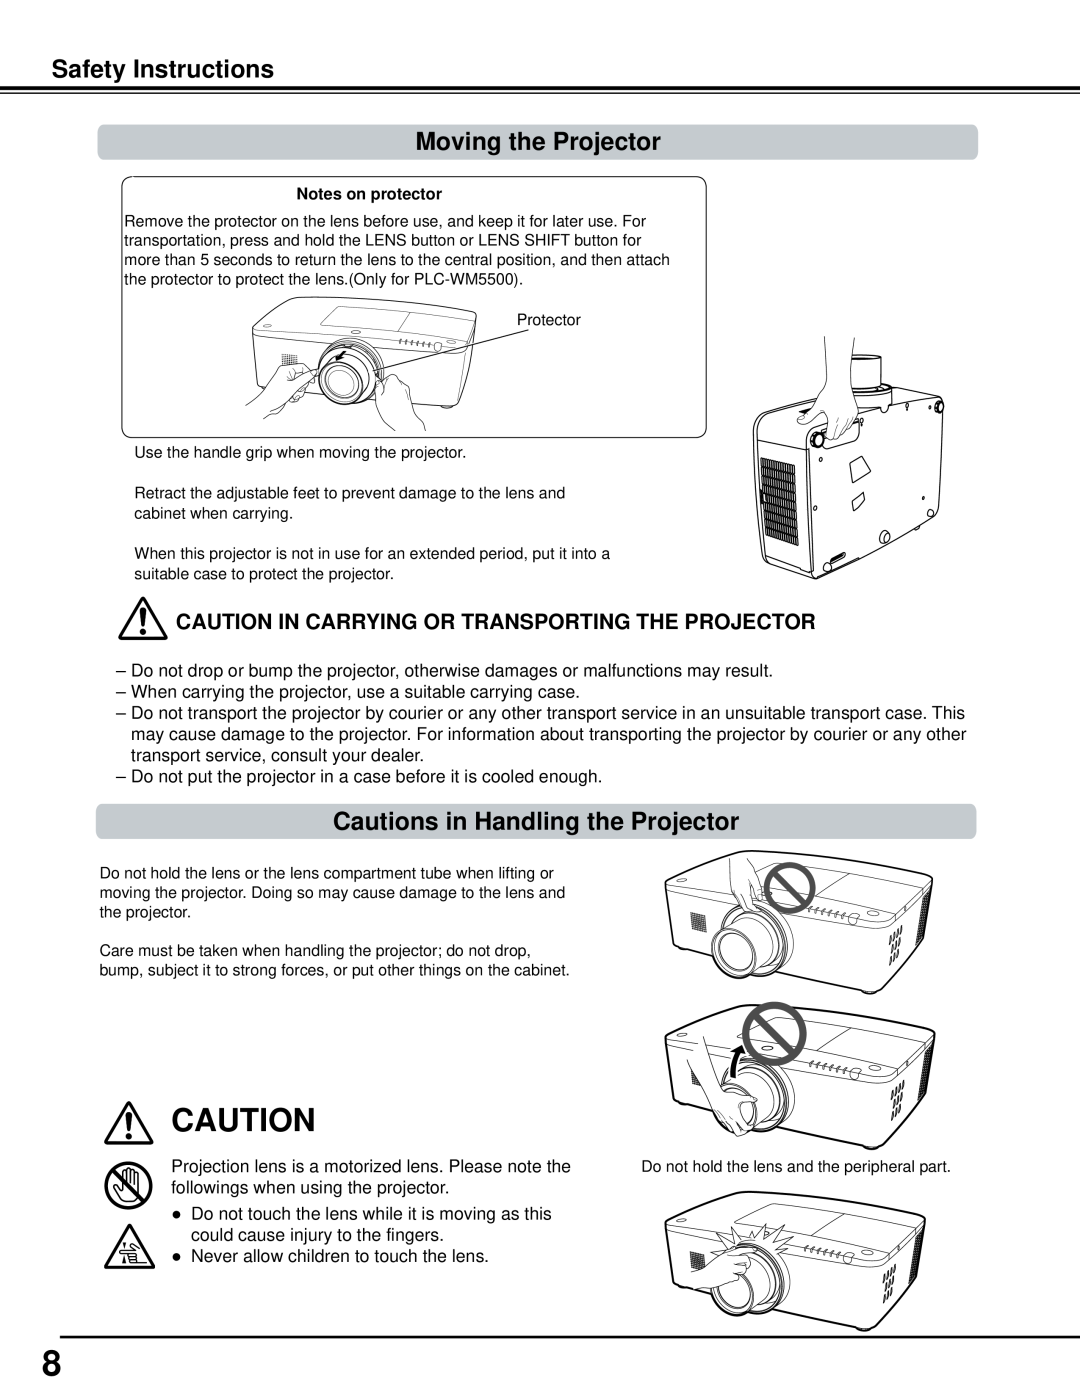 Sanyo WM5500L, PLC-WM5500 owner manual Safety Instructions Moving the Projector, Cautions in Handling the Projector 